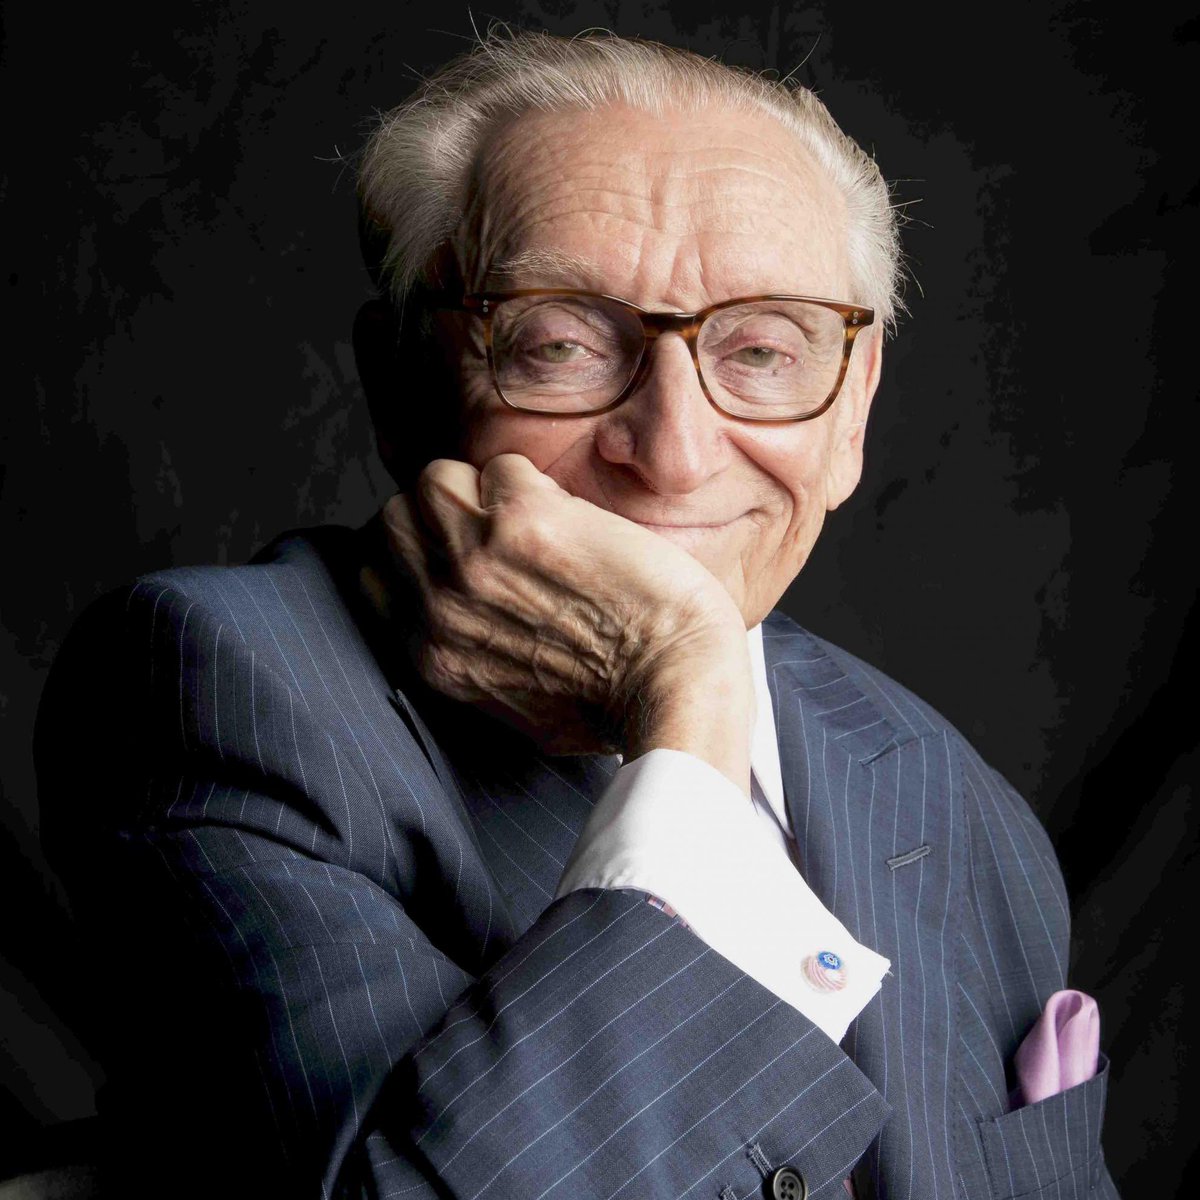 Meet Lucky Larry!!

 👉🏼 this is Donald Trump’s nickname for Larry and you’ll find out why now…

————————

On 9/11/2001, #LarrySilverstein just so happened to be absent from work because of a doctor's appointment. He later claimed that the appointment was cancelled, and rather